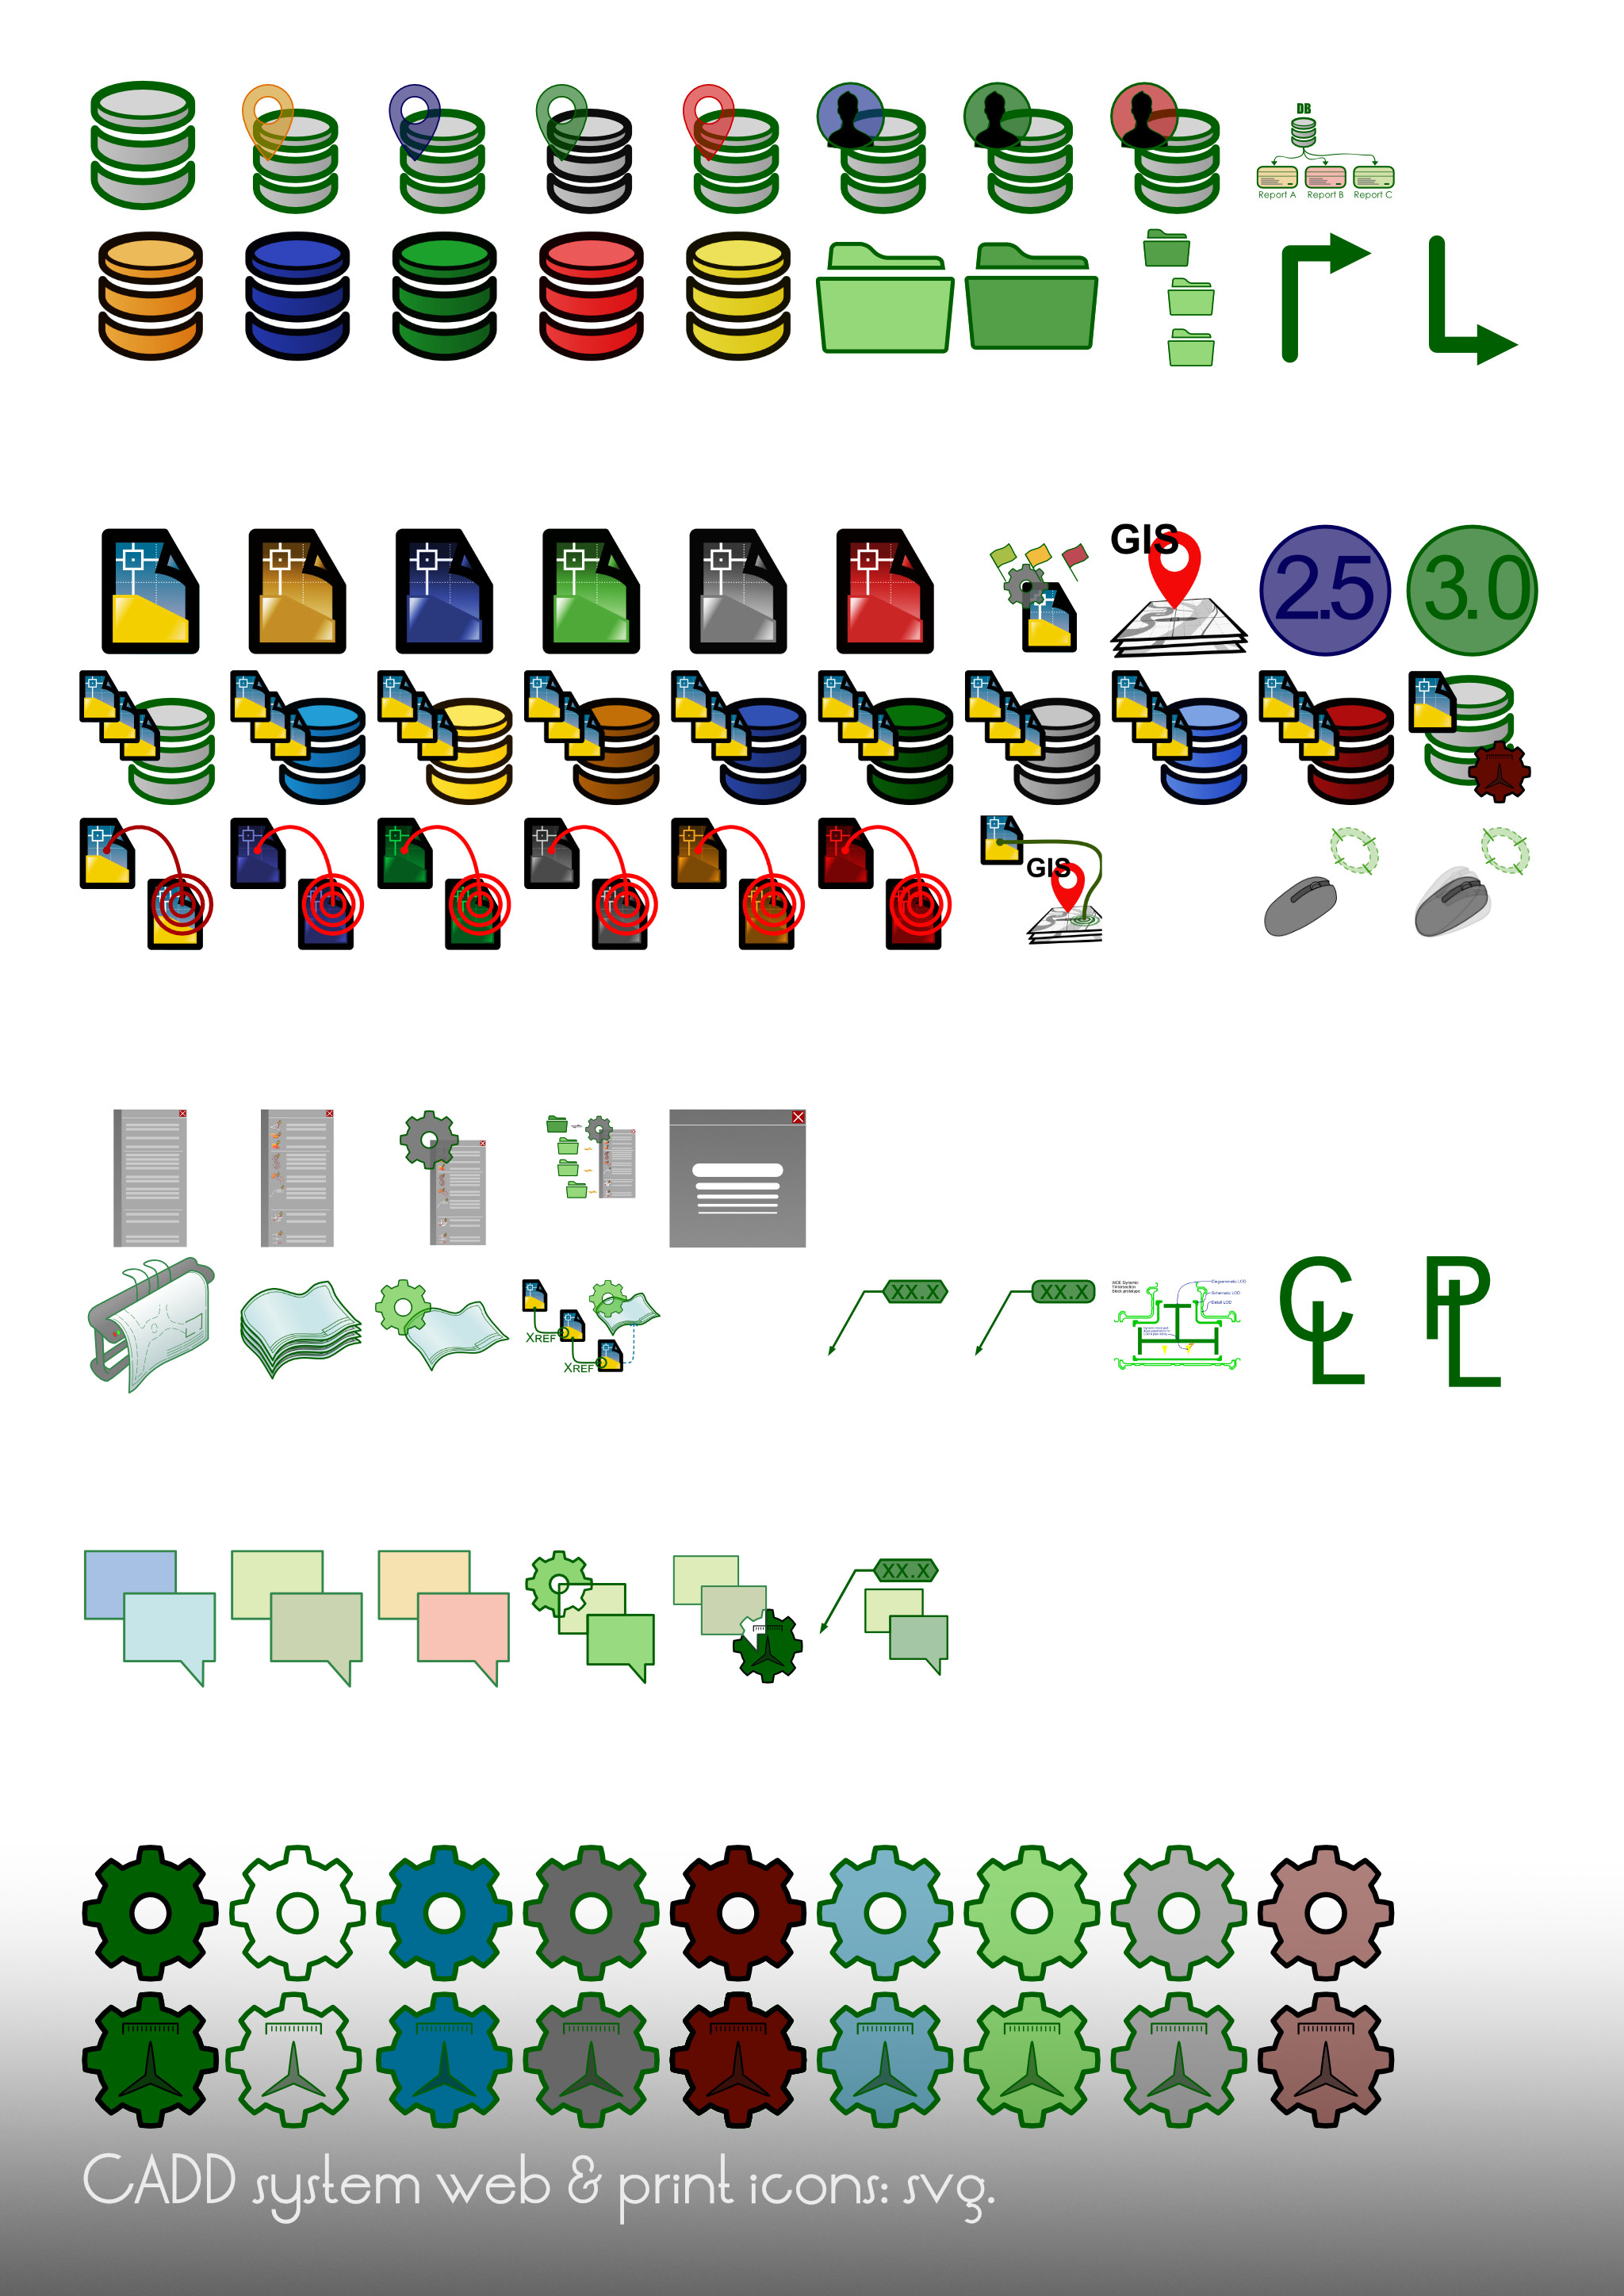 Specific CADD icons developed for a client's extensive help system. These are all new icons for in-house CADD systems documentation; due to the highly technical nature of the concepts, and high time-on-page, these icons have more detail than typical.